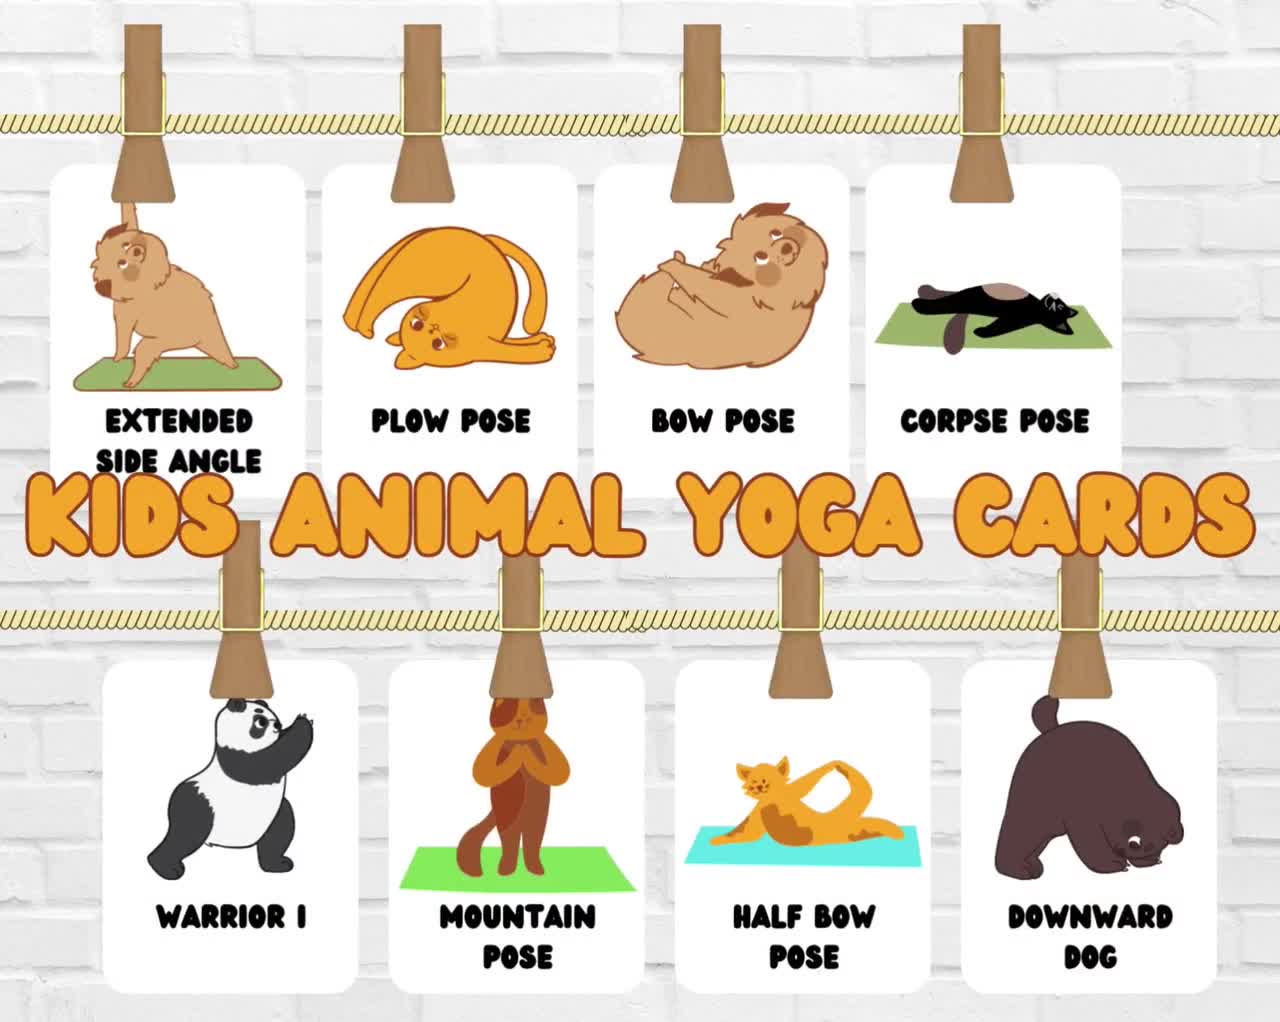 Tide Pool Animals Yoga Poses and Books - Kids Yoga Stories | Yoga and  mindfulness resources for kids | Yoga for kids, Animal yoga, Kids yoga poses